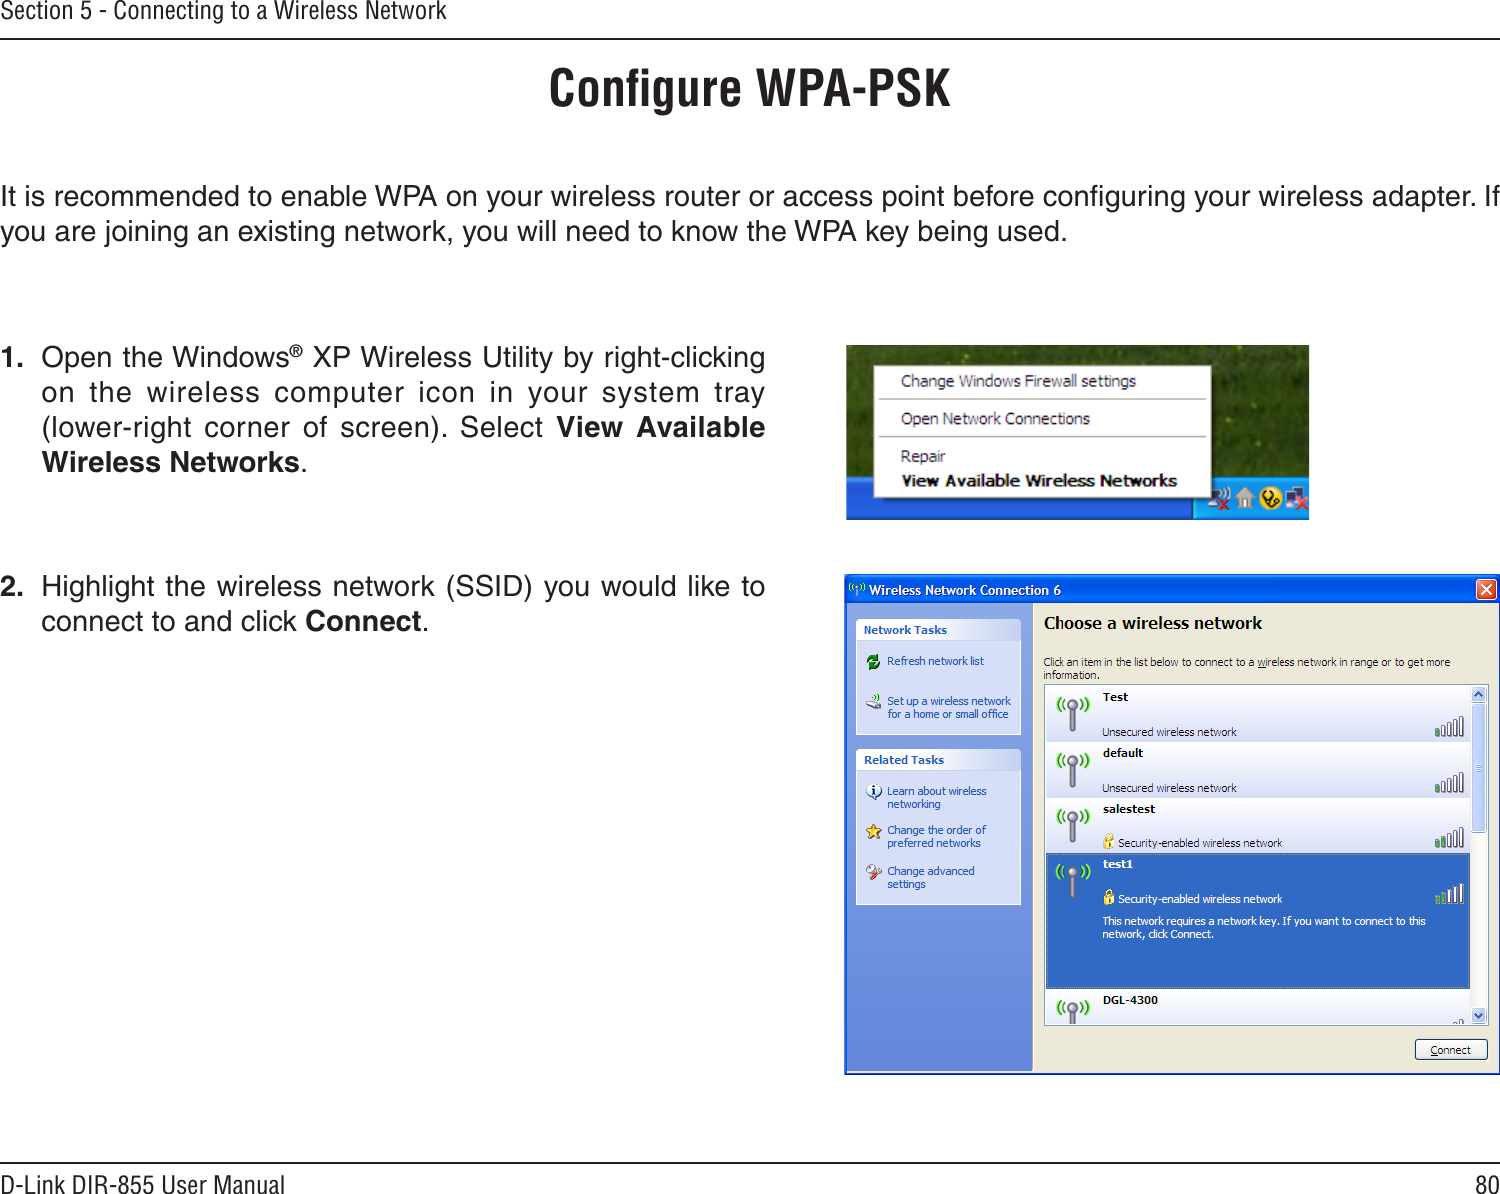 80D-Link DIR-855 User ManualSection 5 - Connecting to a Wireless NetworkConﬁgure WPA-PSKIt is recommended to enable WPA on your wireless router or access point before conﬁguring your wireless adapter. If you are joining an existing network, you will need to know the WPA key being used.2.  Highlight the wireless network (SSID) you would like to connect to and click Connect.1.  Open the Windows® XP Wireless Utility by right-clicking on  the  wireless  computer  icon  in  your  system  tray  (lower-right  corner  of  screen).  Select  View  Available Wireless Networks. 